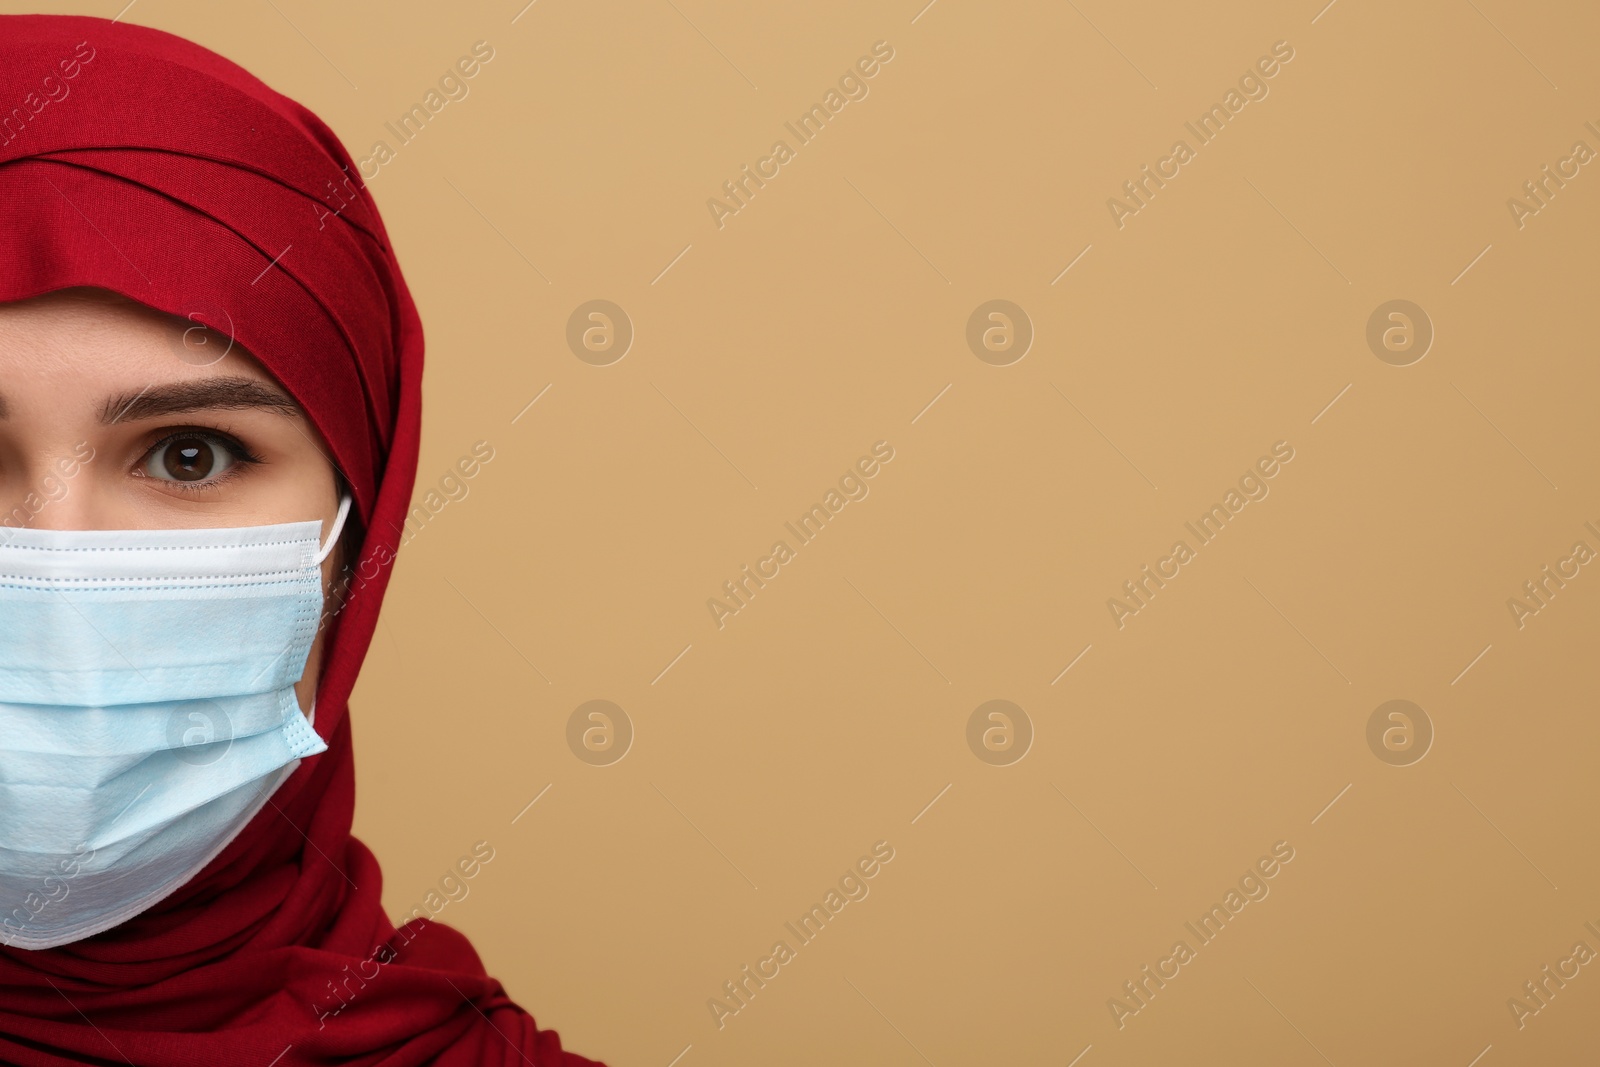 Photo of Muslim woman in hijab and medical mask on beige background, space for text